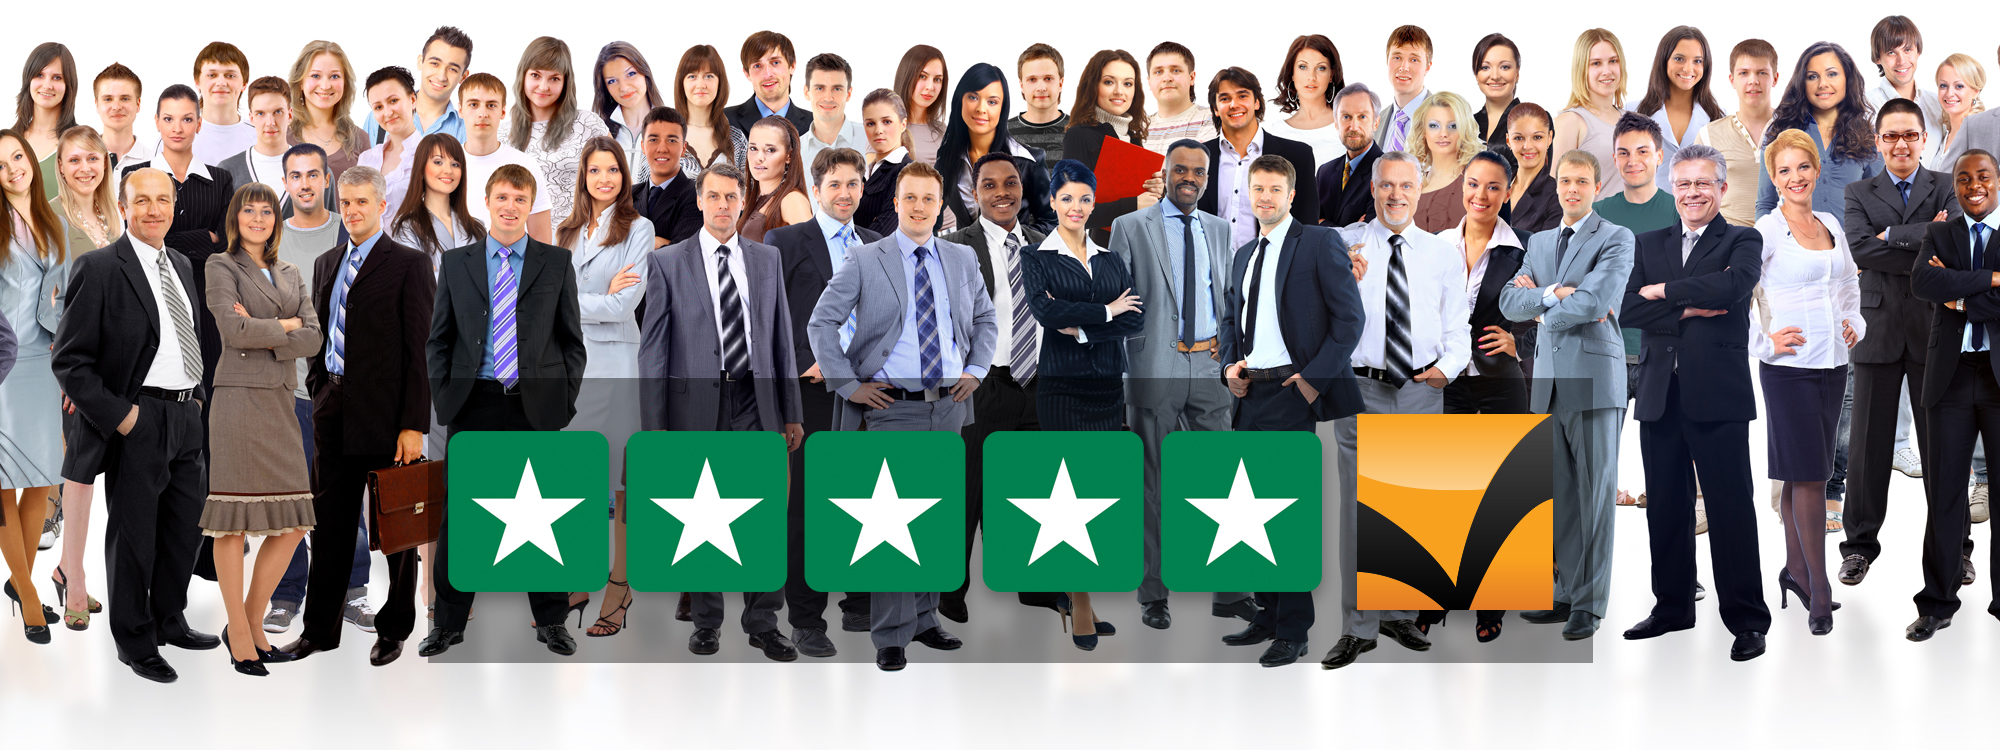 Schulich ExecEd joins Trustpilot community and gets rave reviews